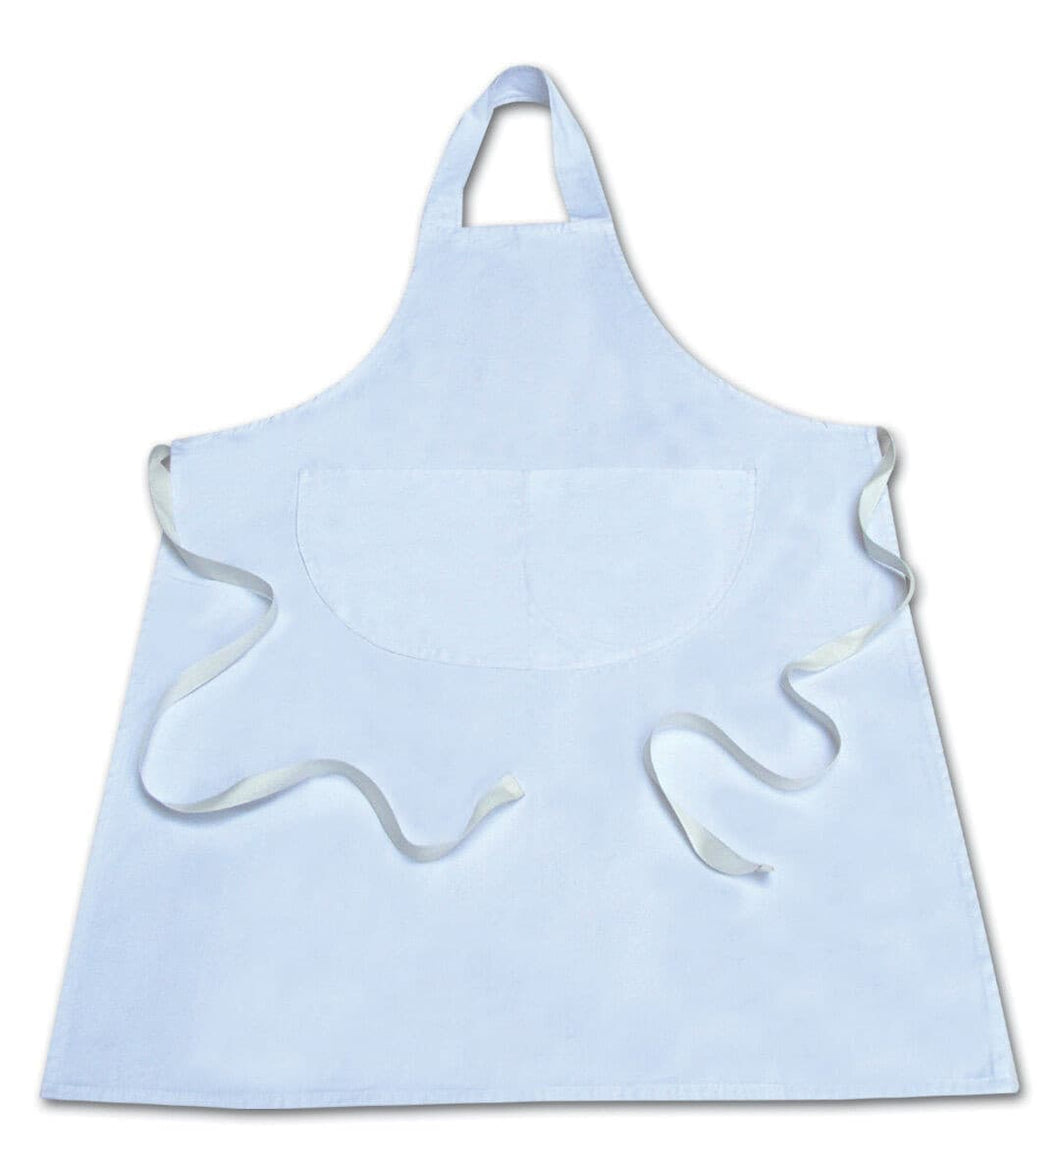 Details about  White Apron Butchers Catering Cooking Professional Chef Aprons